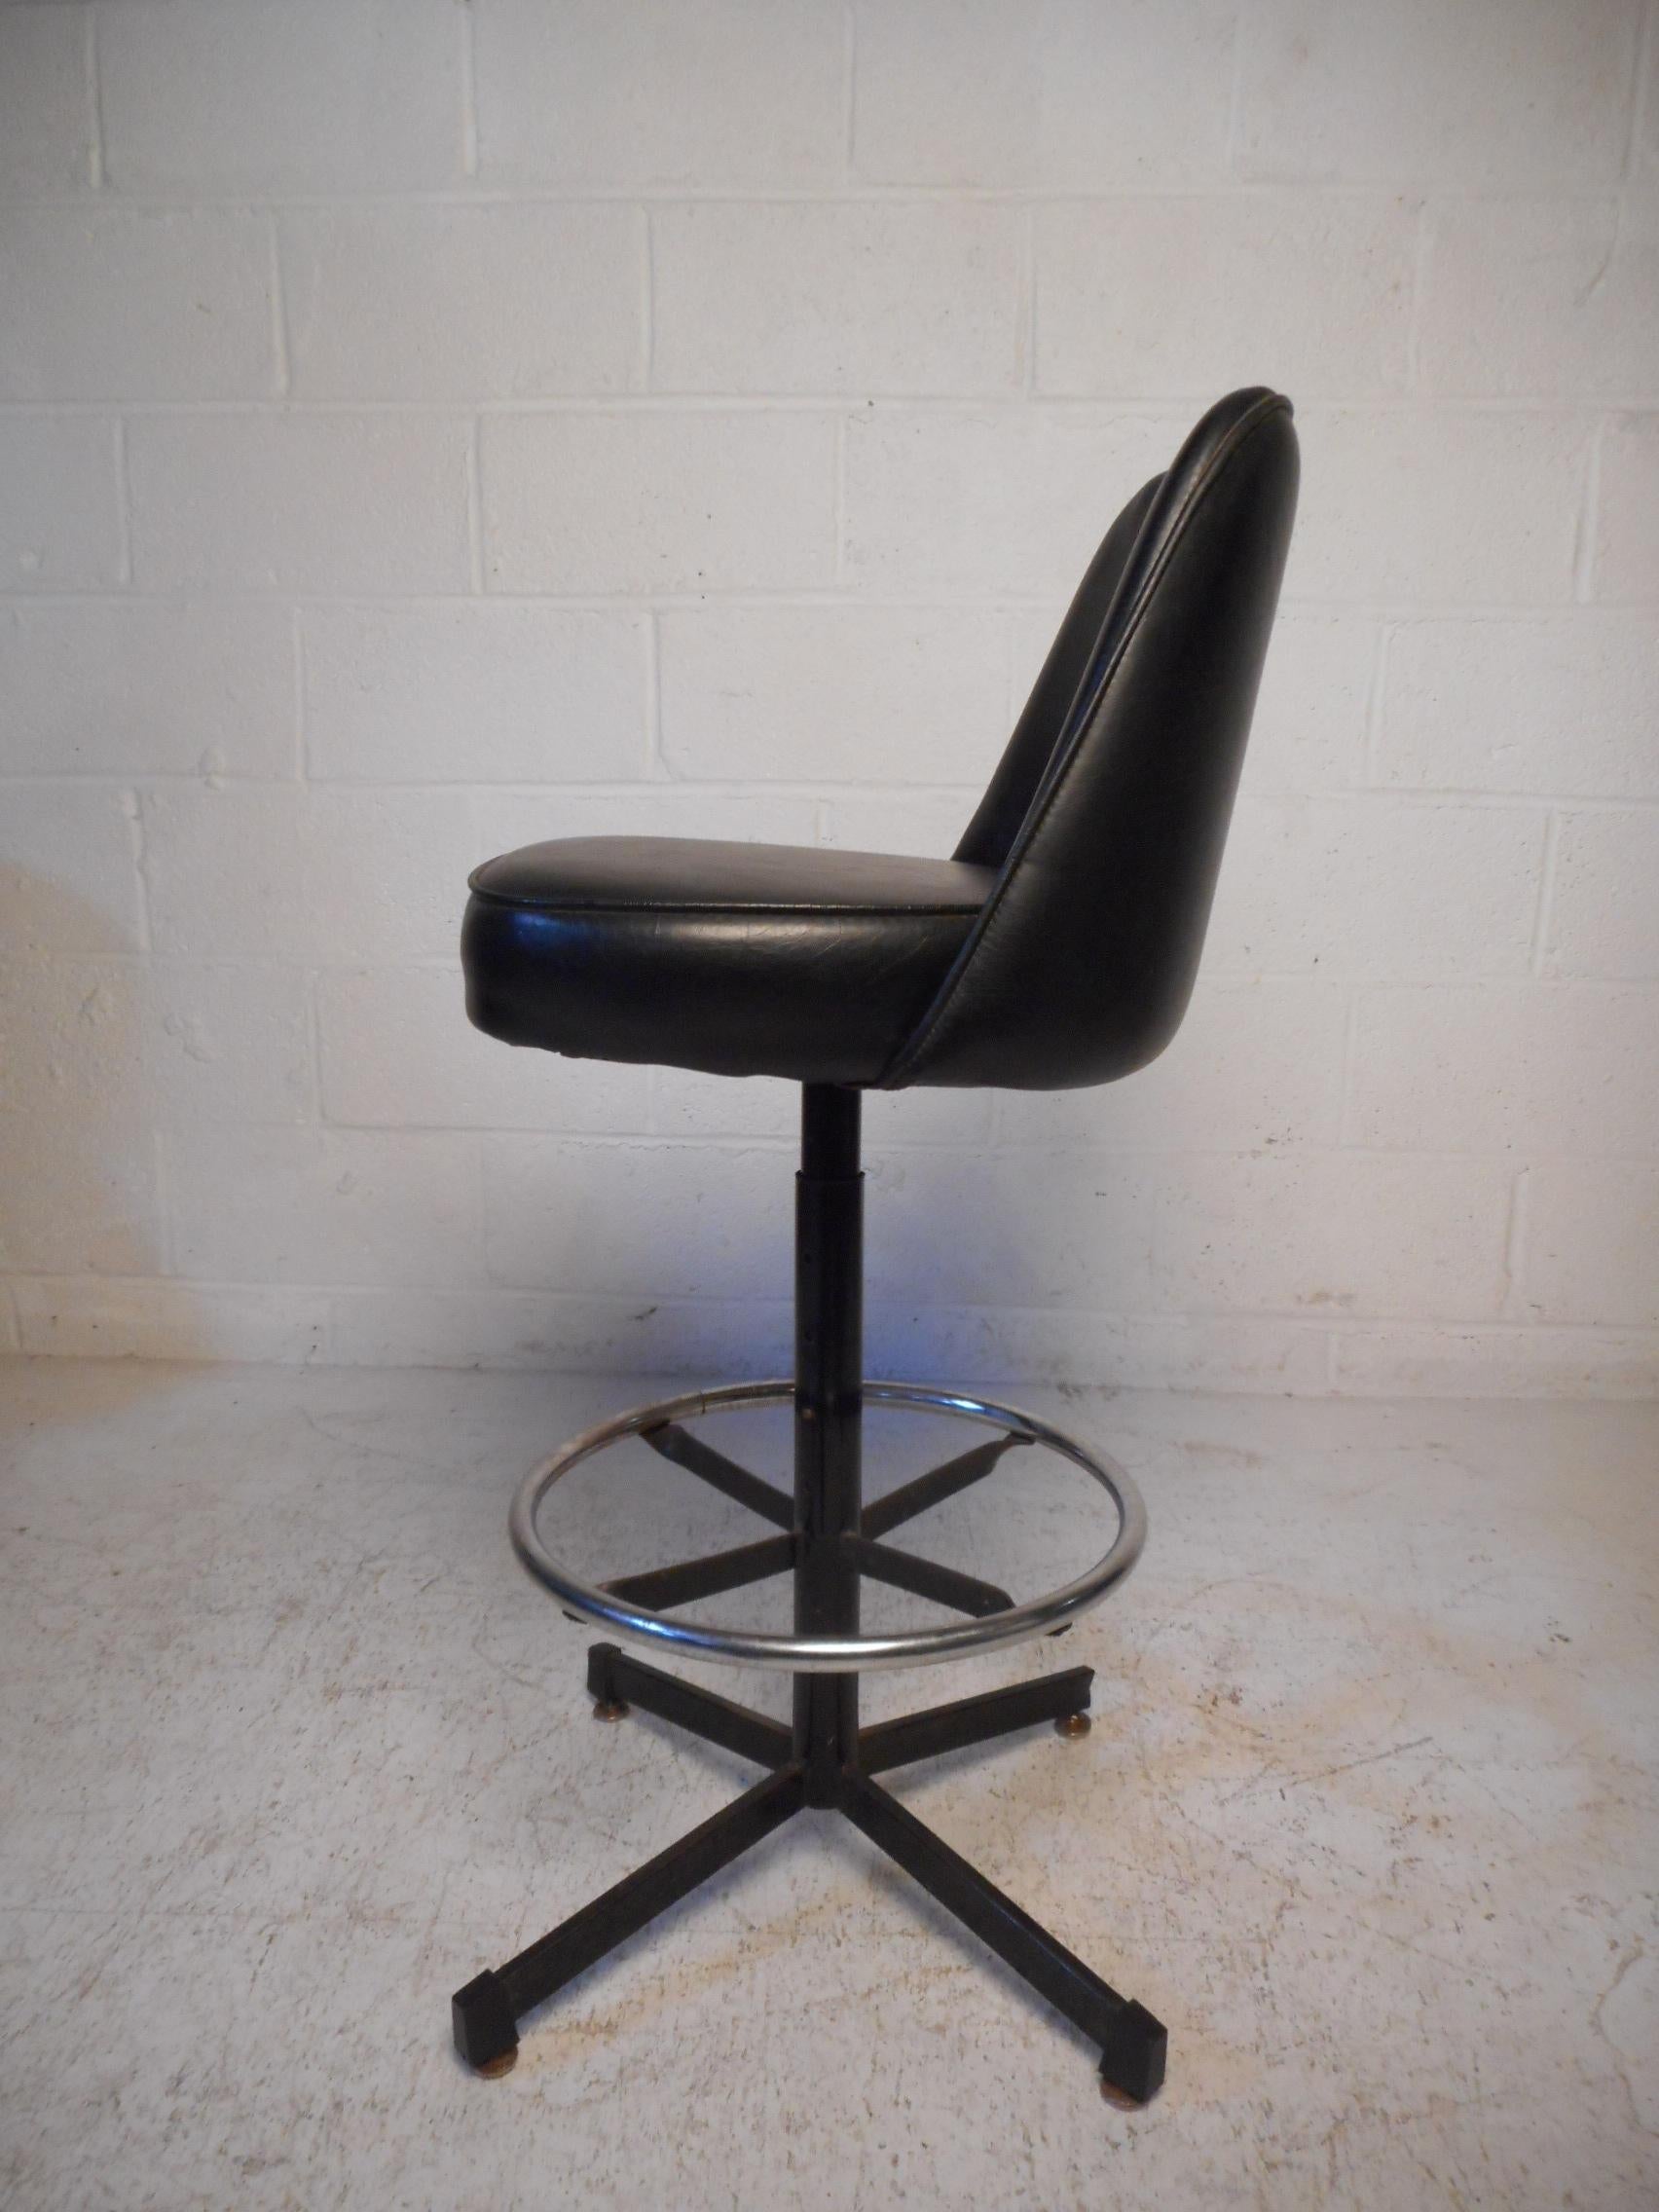 Admiral Chrome Corp At 1stdibs, Vintage Chromcraft Bar Stools Replacement Seats